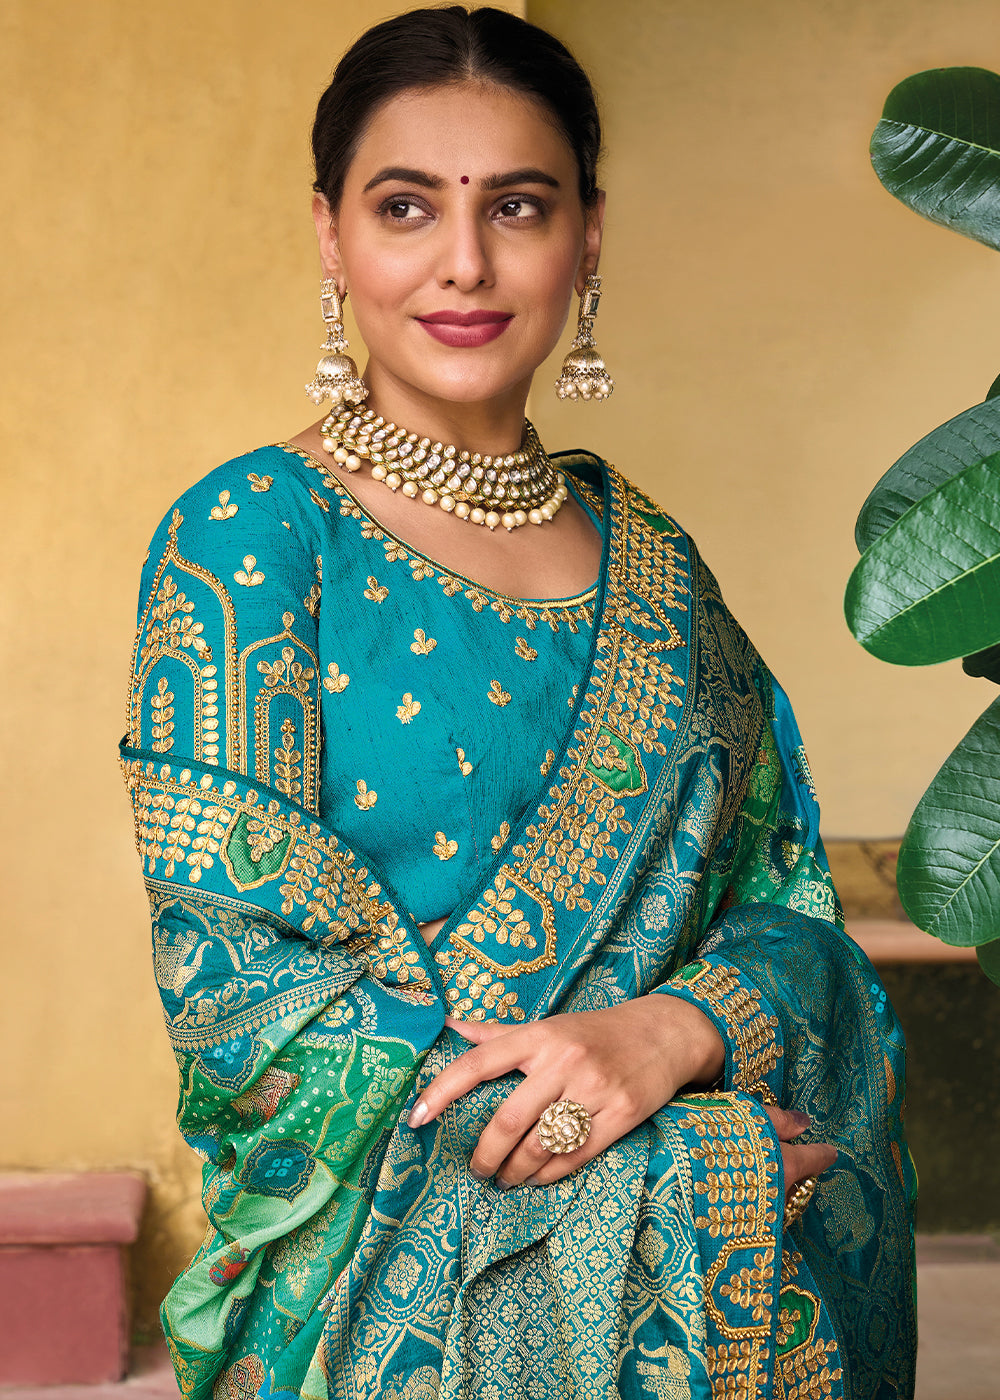 Shades Of Blue Dola Silk Saree with Beautiful Embroidery work: Wedding Edition